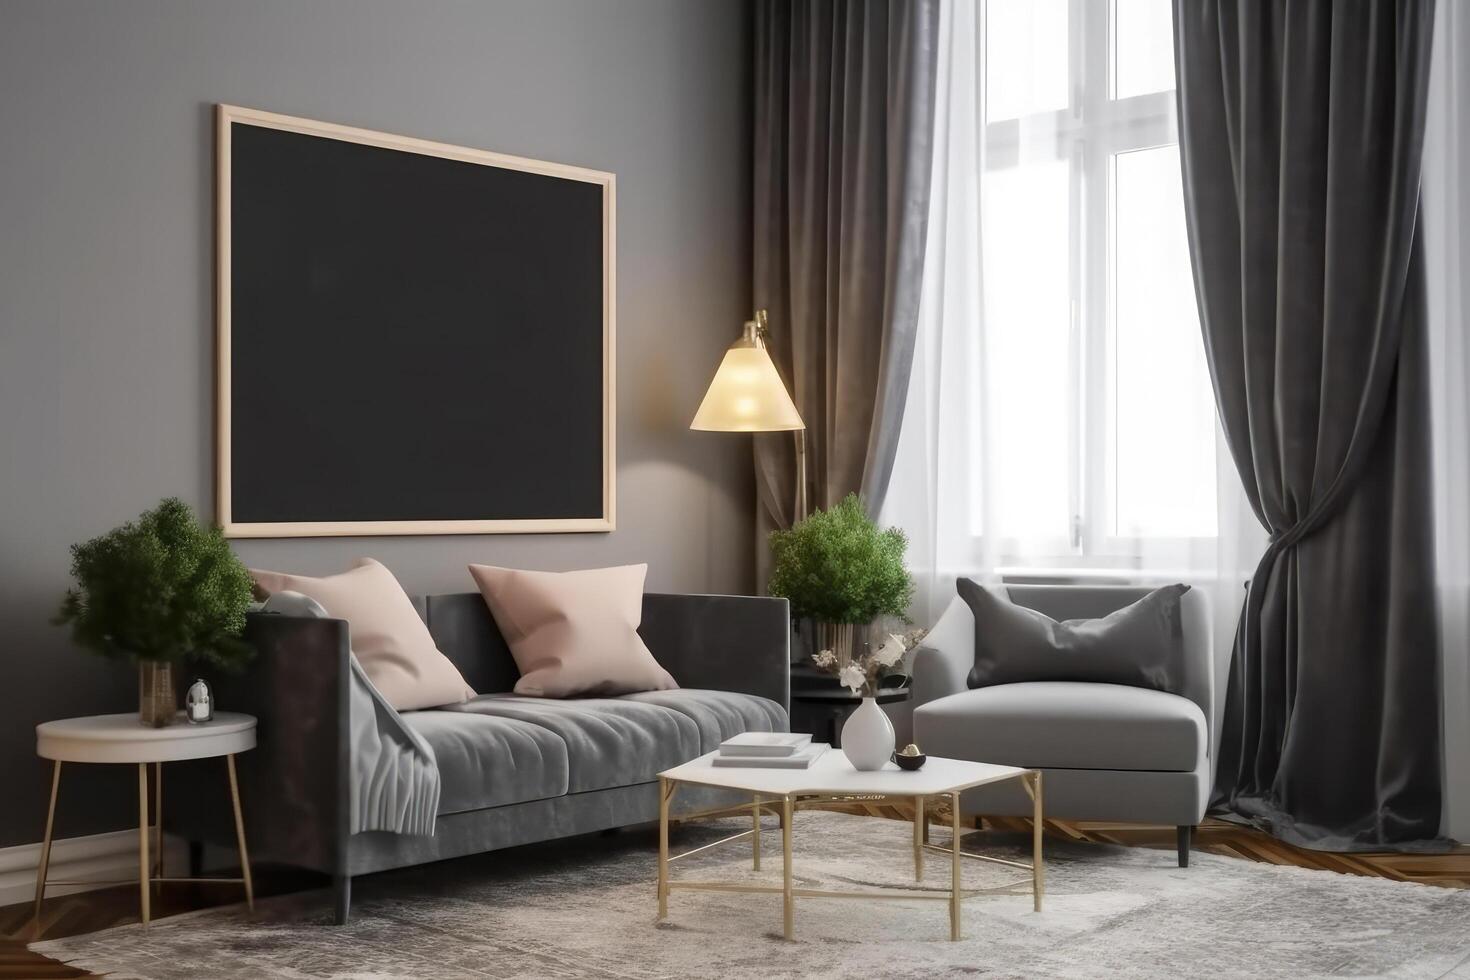 Interior of modern living room with grey sofa, coffee table and blackboard, Mockup poster frame on the wall of a luxurious apartment, photo